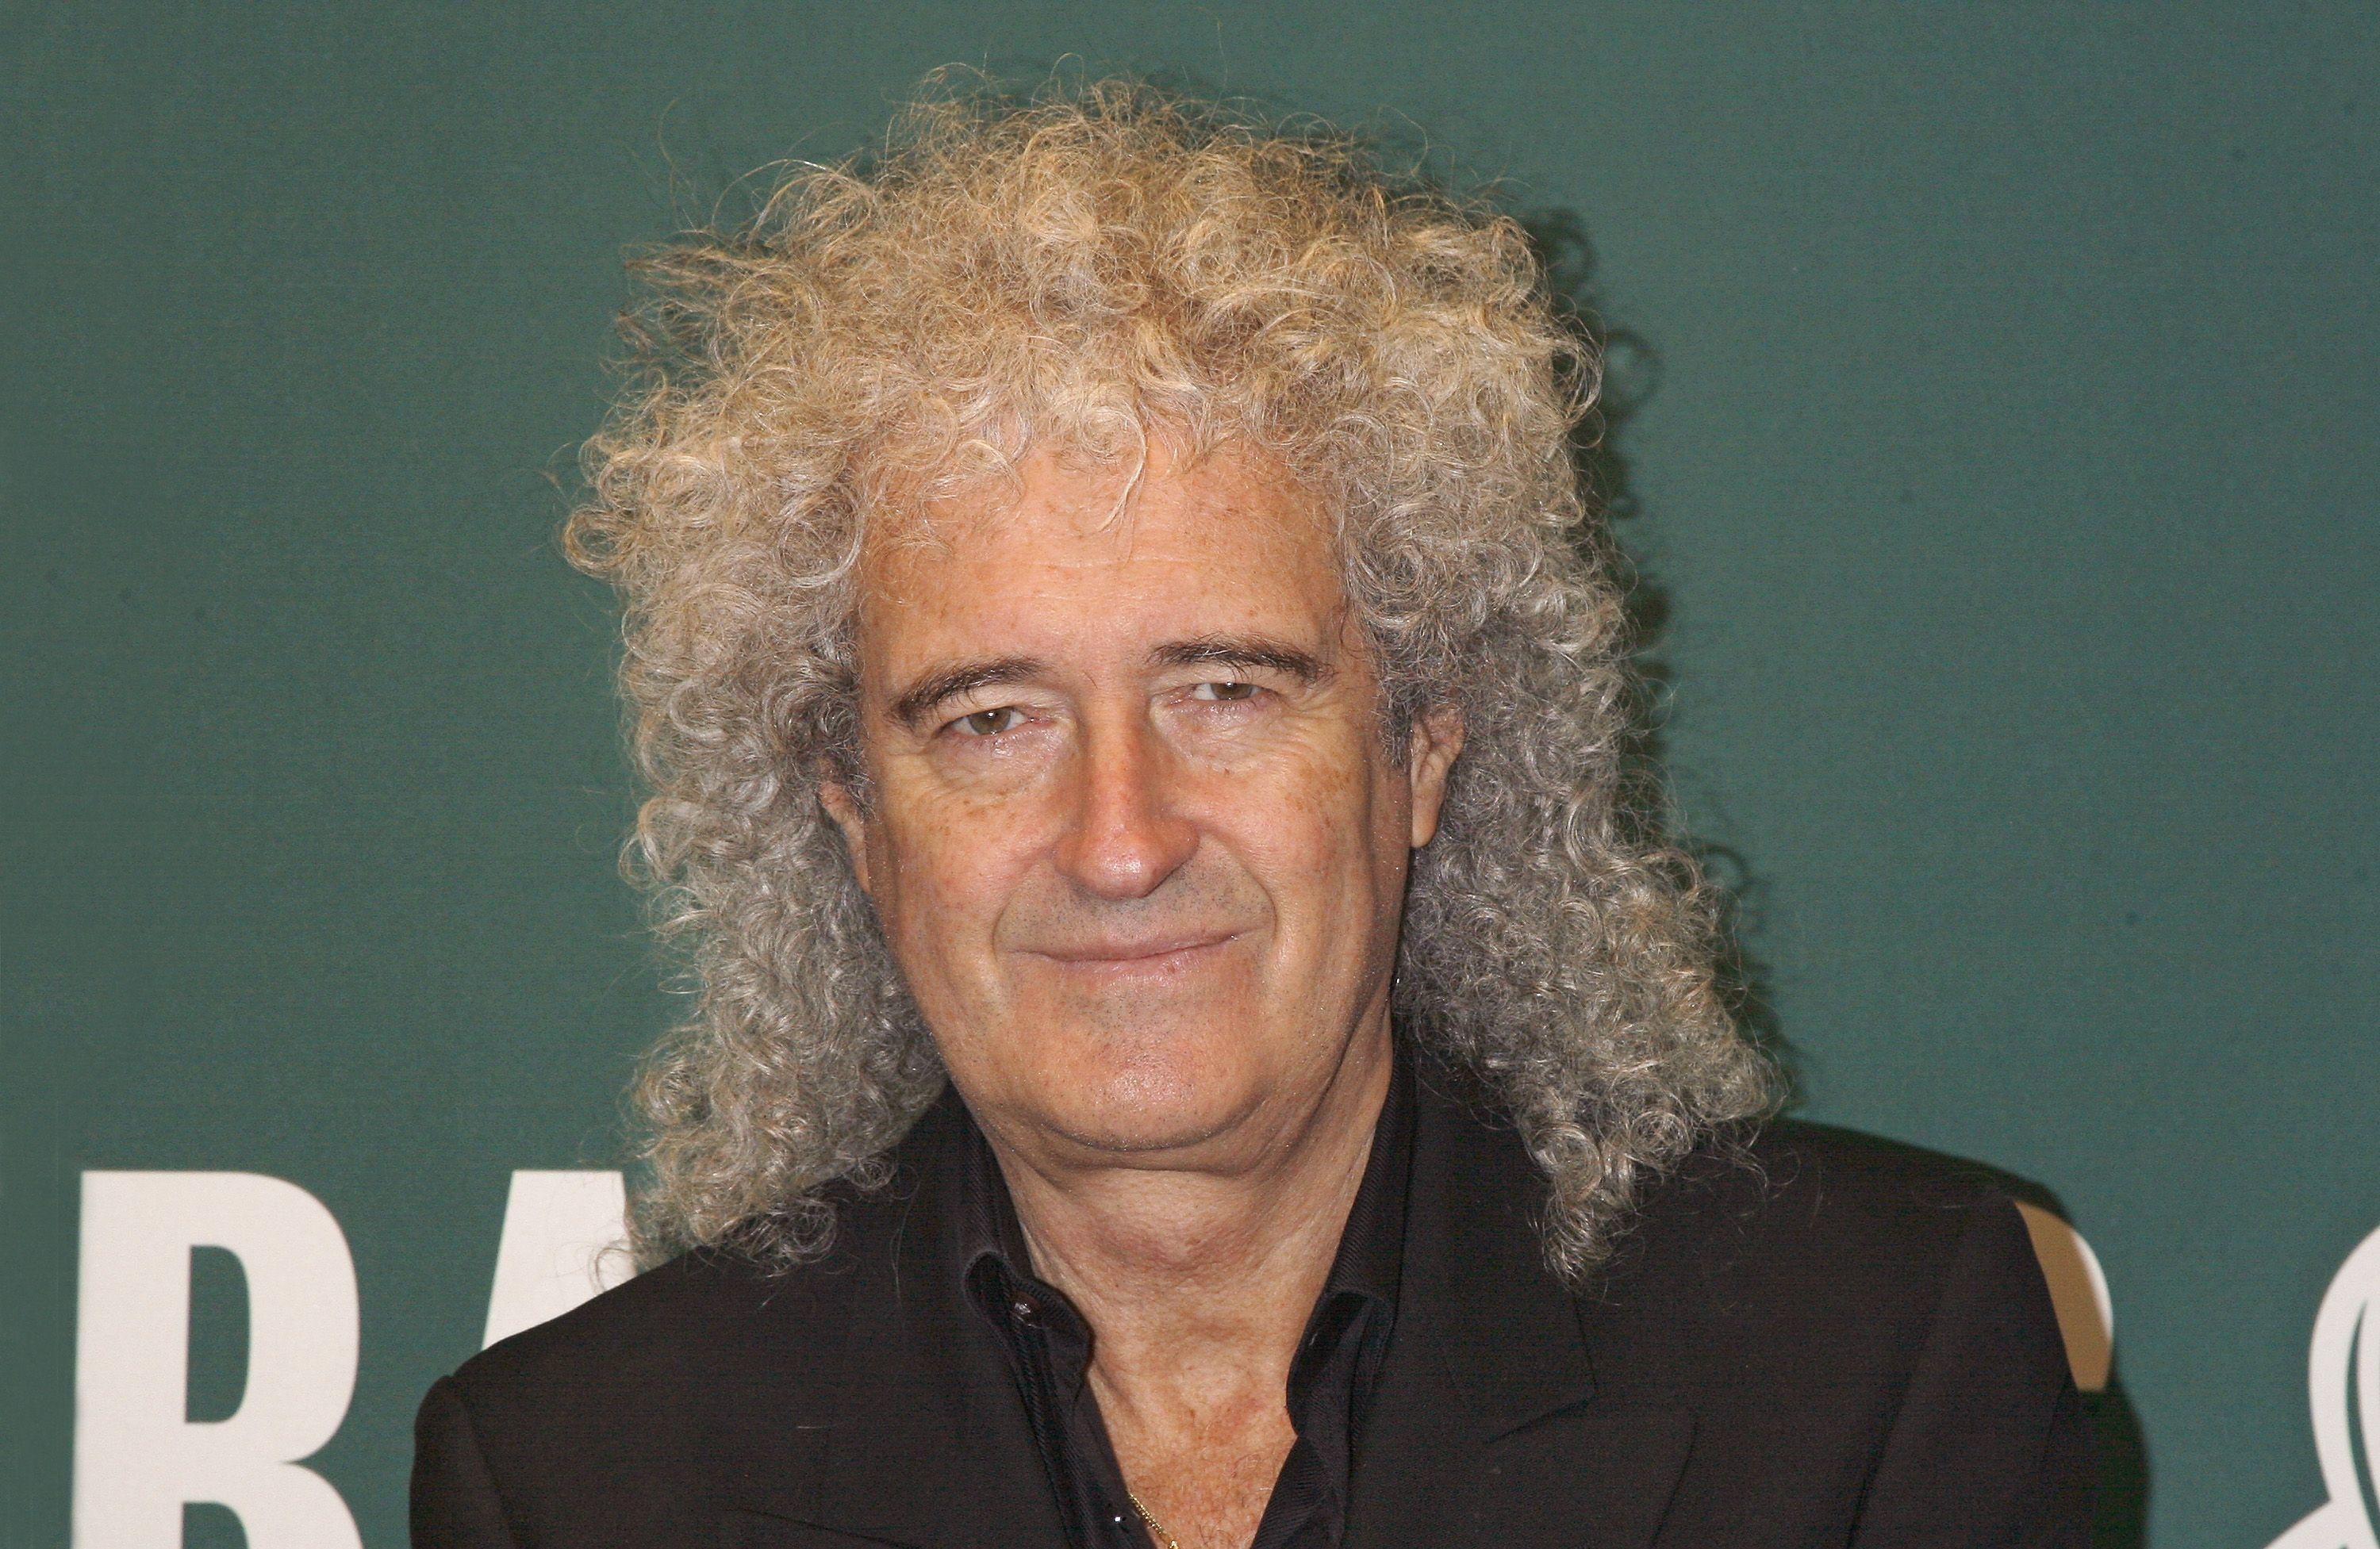 Brian May reveals he is undergoing 'urgent' tests for cancer